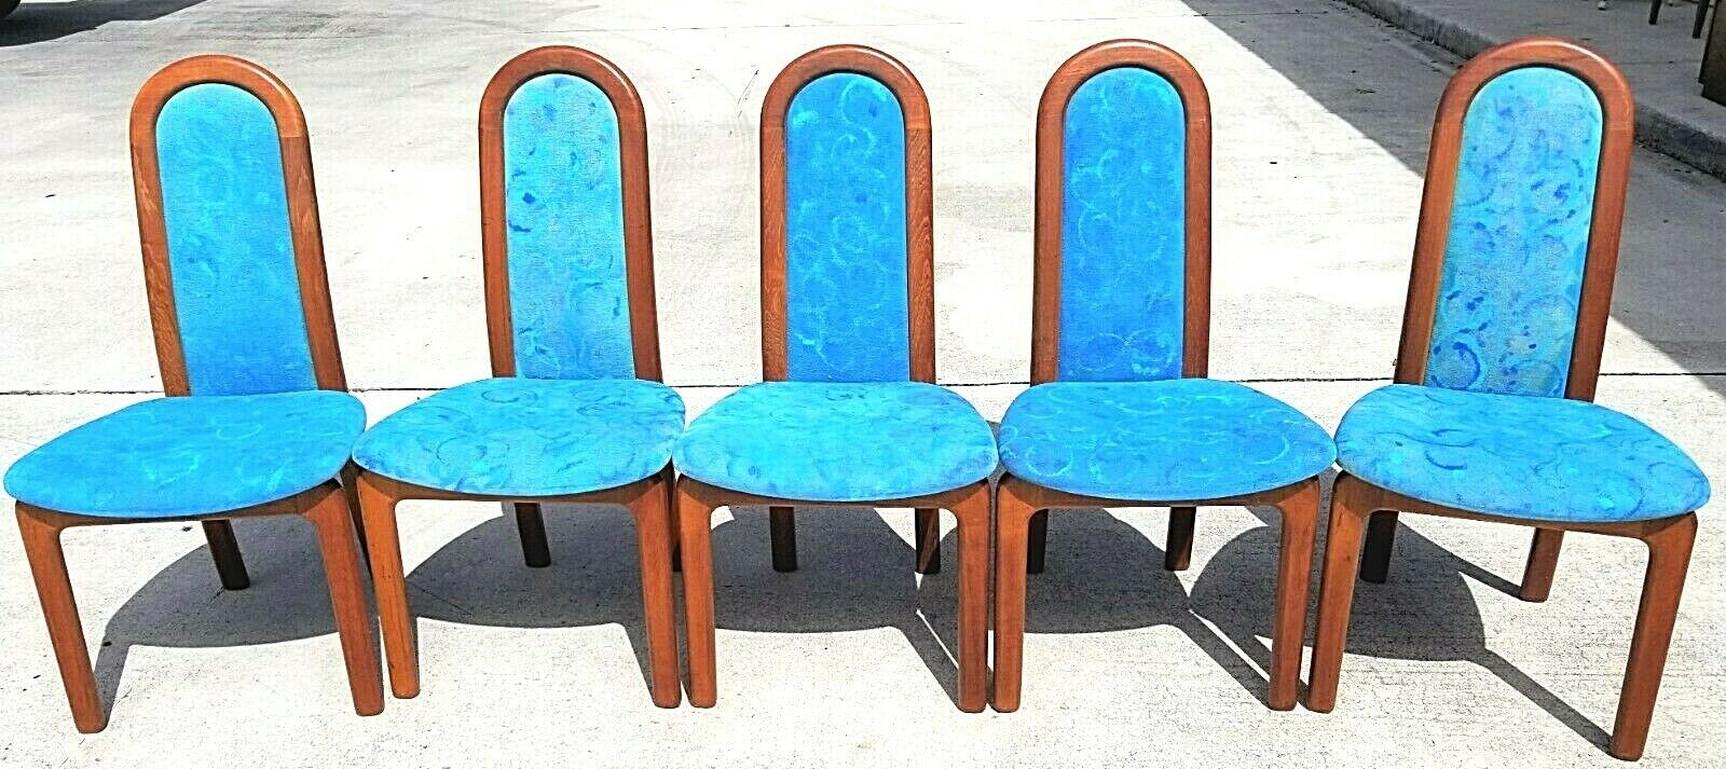 Offering one of our recent palm beach estate fine furniture acquisitions of a
Set of 5 Vintage MCM Skovby Møbelfabrik Solid Teak Dining Chairs Denmark 1960s

We also have the matching table shown available and listed separately.

Approximate